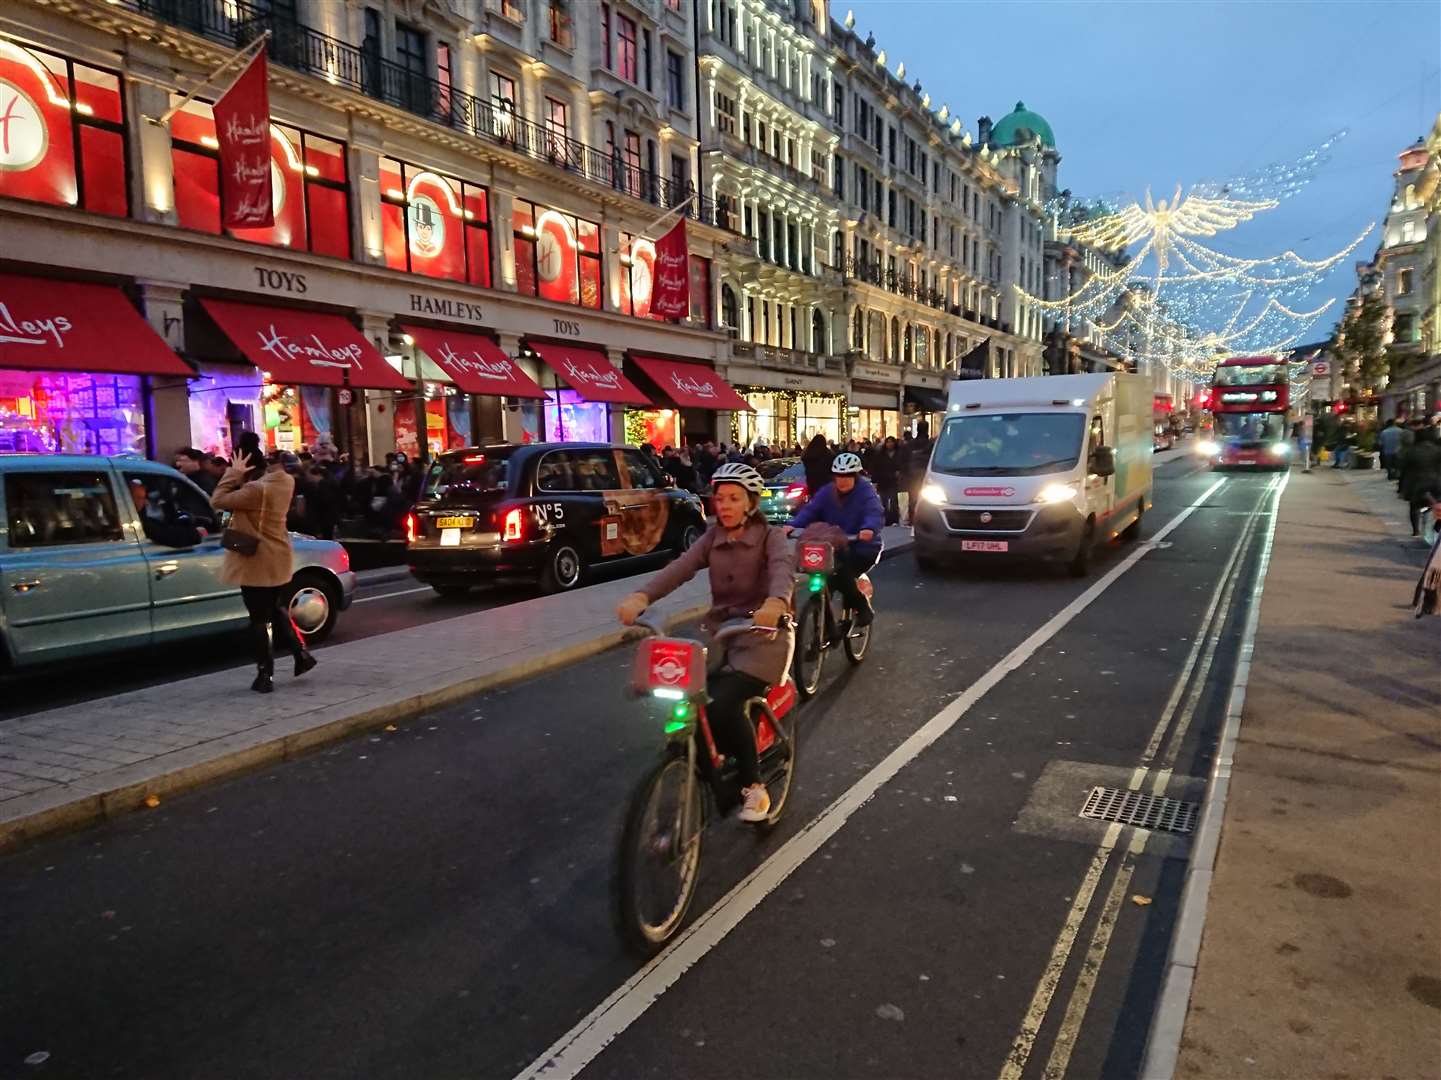 As the early evening set in, Hamleys lit up Regent Street